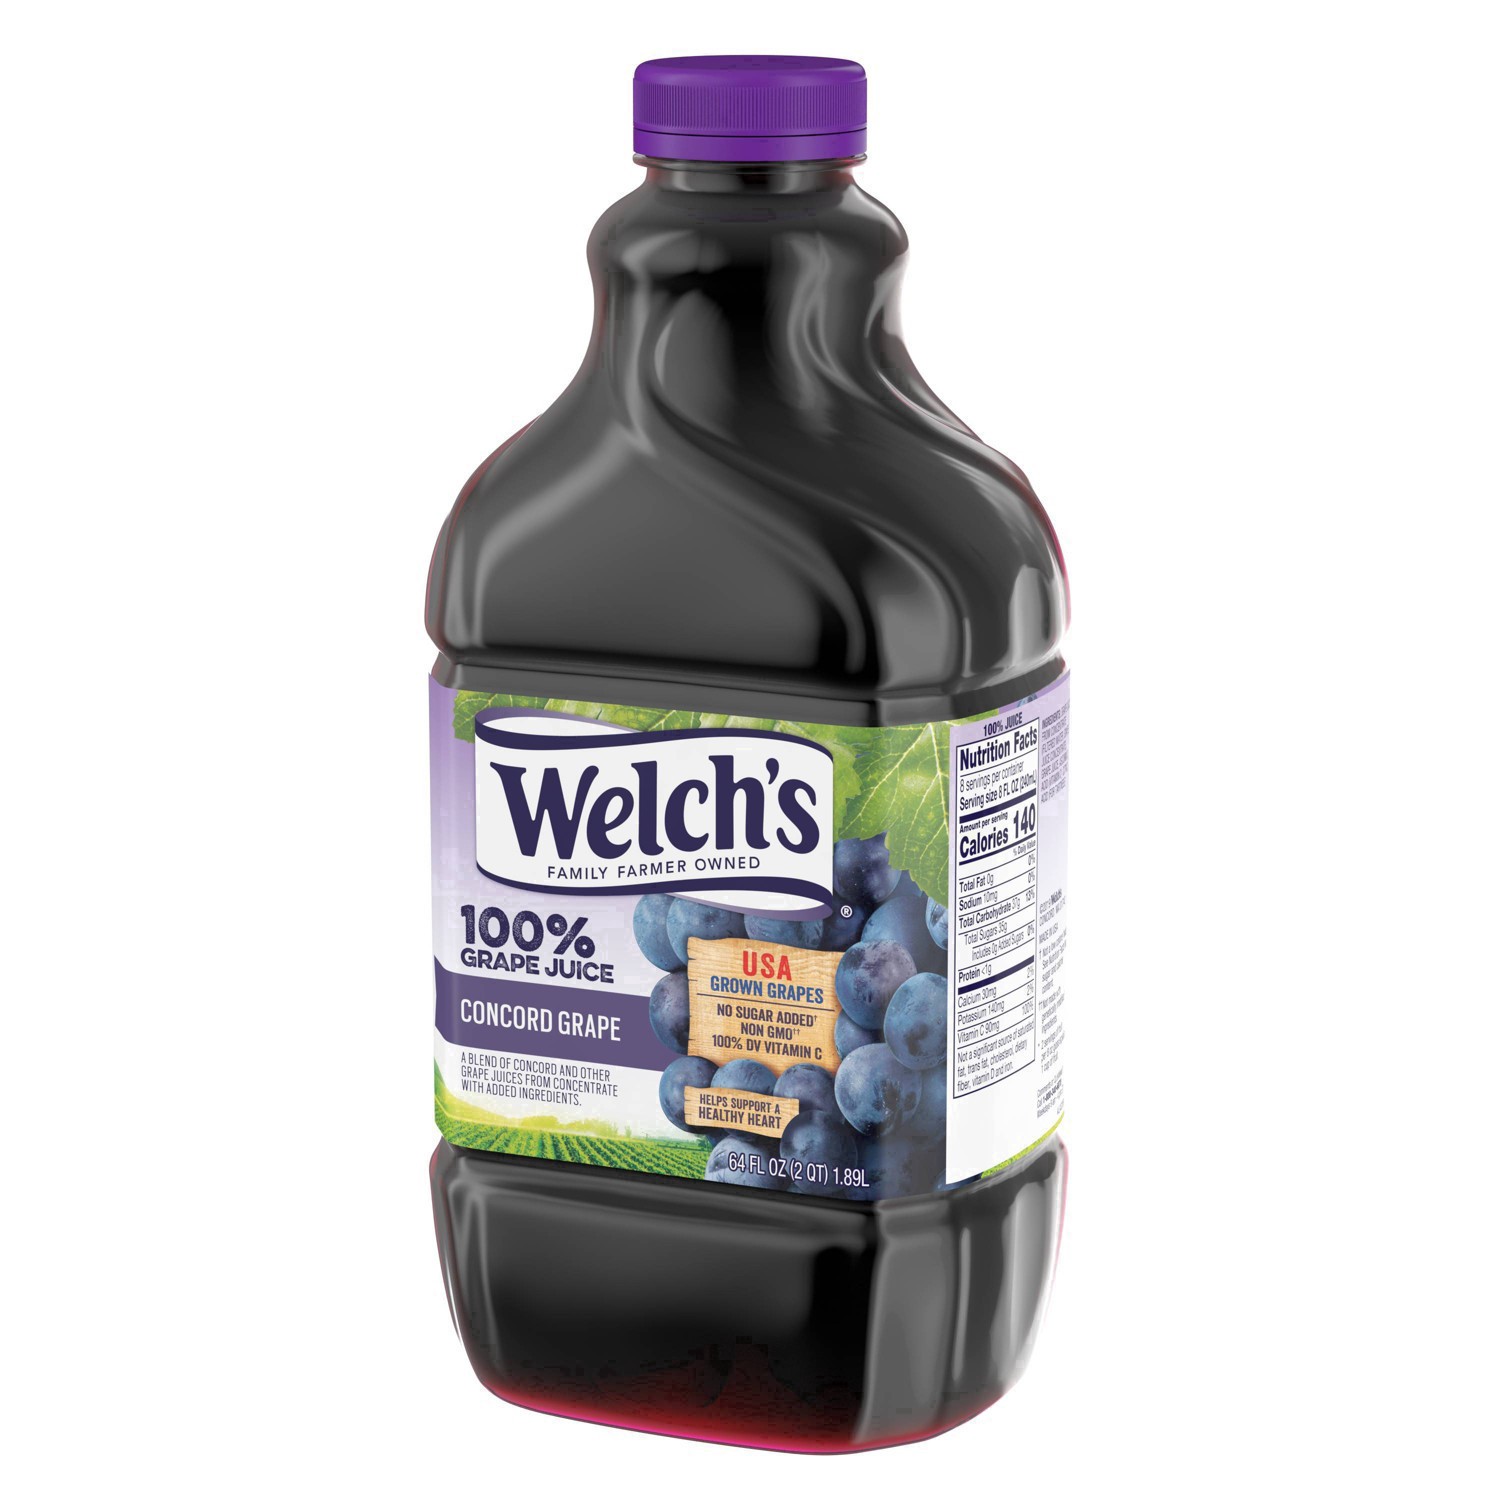 slide 14 of 70, Welch's 100% Concord Grape Juice, 64 oz